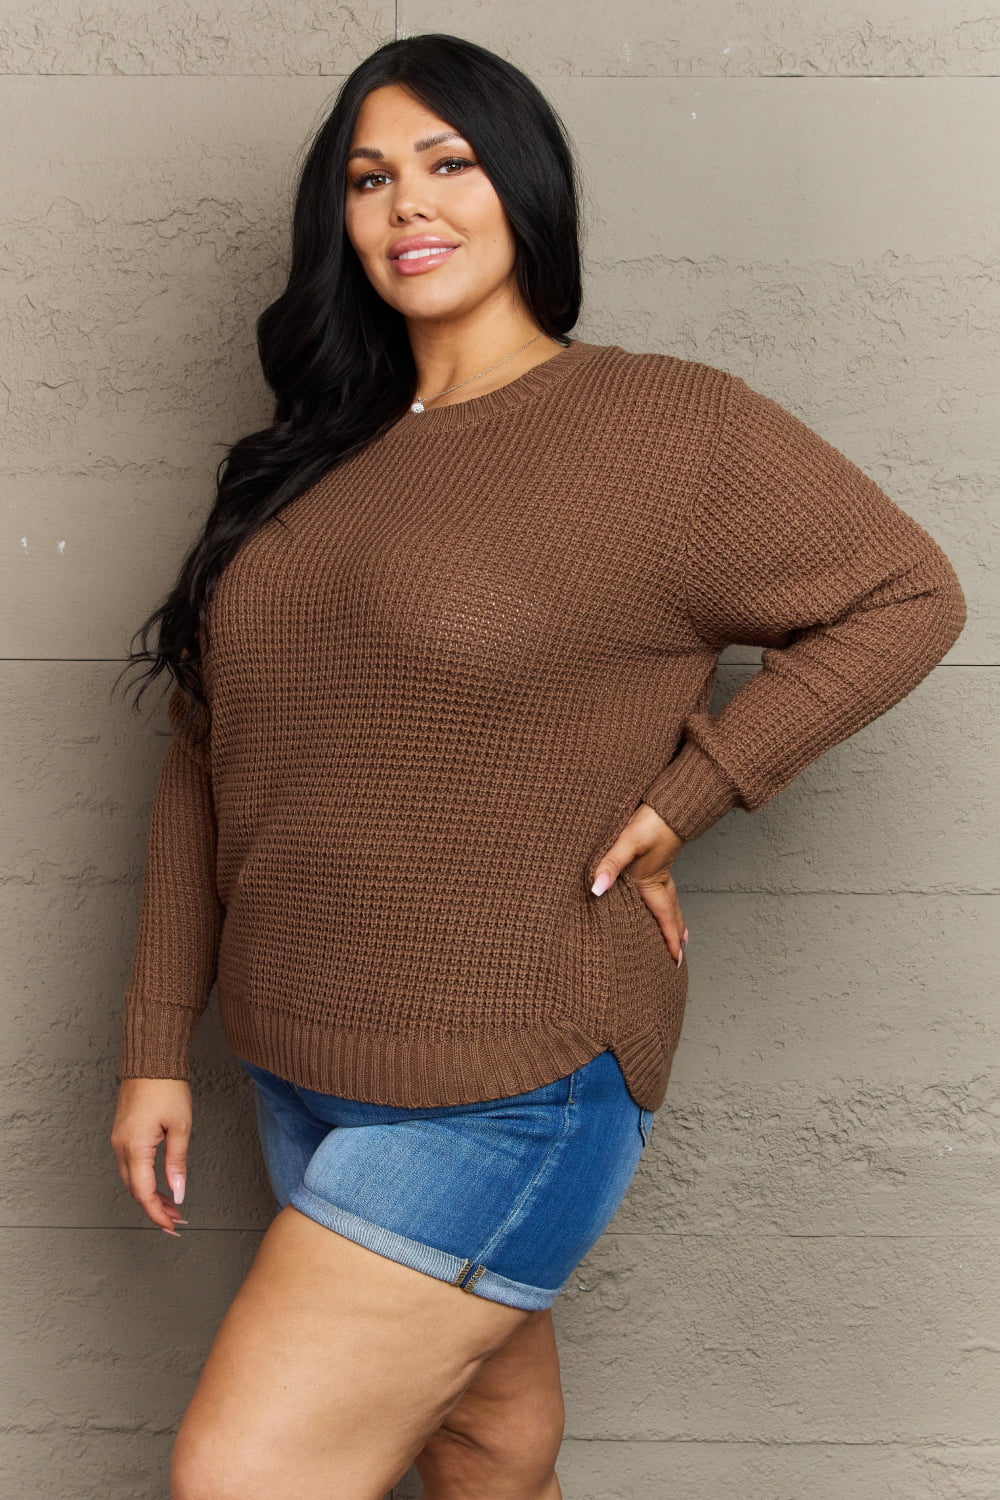 Breezy Days Plus Size High Low Waffle Knit Sweater - Sweaters - Shirts & Tops - 3 - 2024